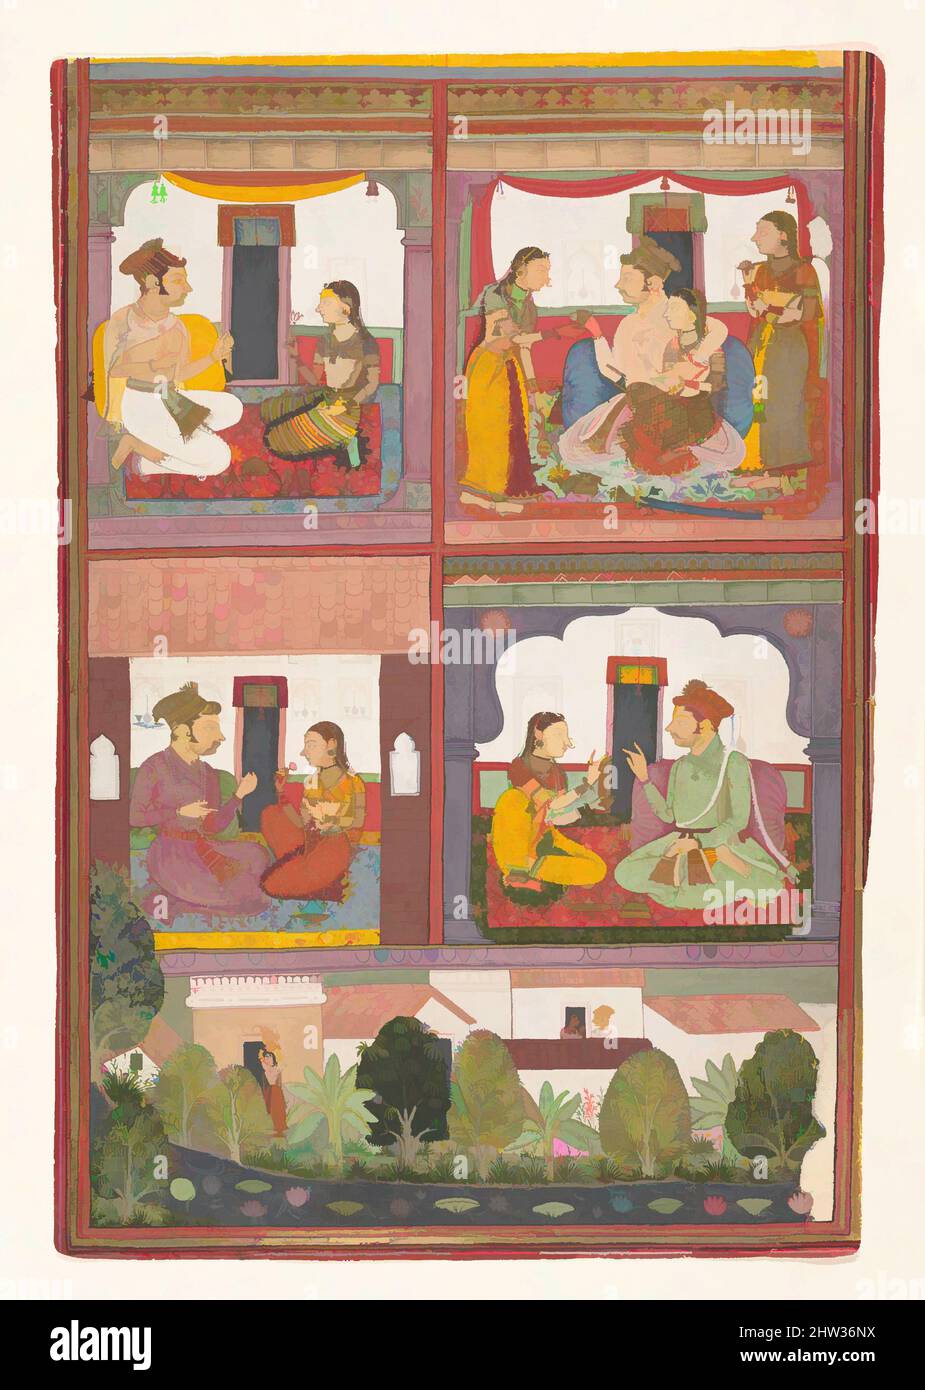 Art inspired by Four Love Scenes and a Landscape: Page from a Dispersed Raskapriya, ca. 1700, India (Rajasthan, Bundi), Ink and opaque watercolor on paper, Image: 11 1/4 × 7 7/8 in. (28.6 × 20 cm), Paintings, The lowest register sets the context for the multiple scenes above; a couple, Classic works modernized by Artotop with a splash of modernity. Shapes, color and value, eye-catching visual impact on art. Emotions through freedom of artworks in a contemporary way. A timeless message pursuing a wildly creative new direction. Artists turning to the digital medium and creating the Artotop NFT Stock Photo